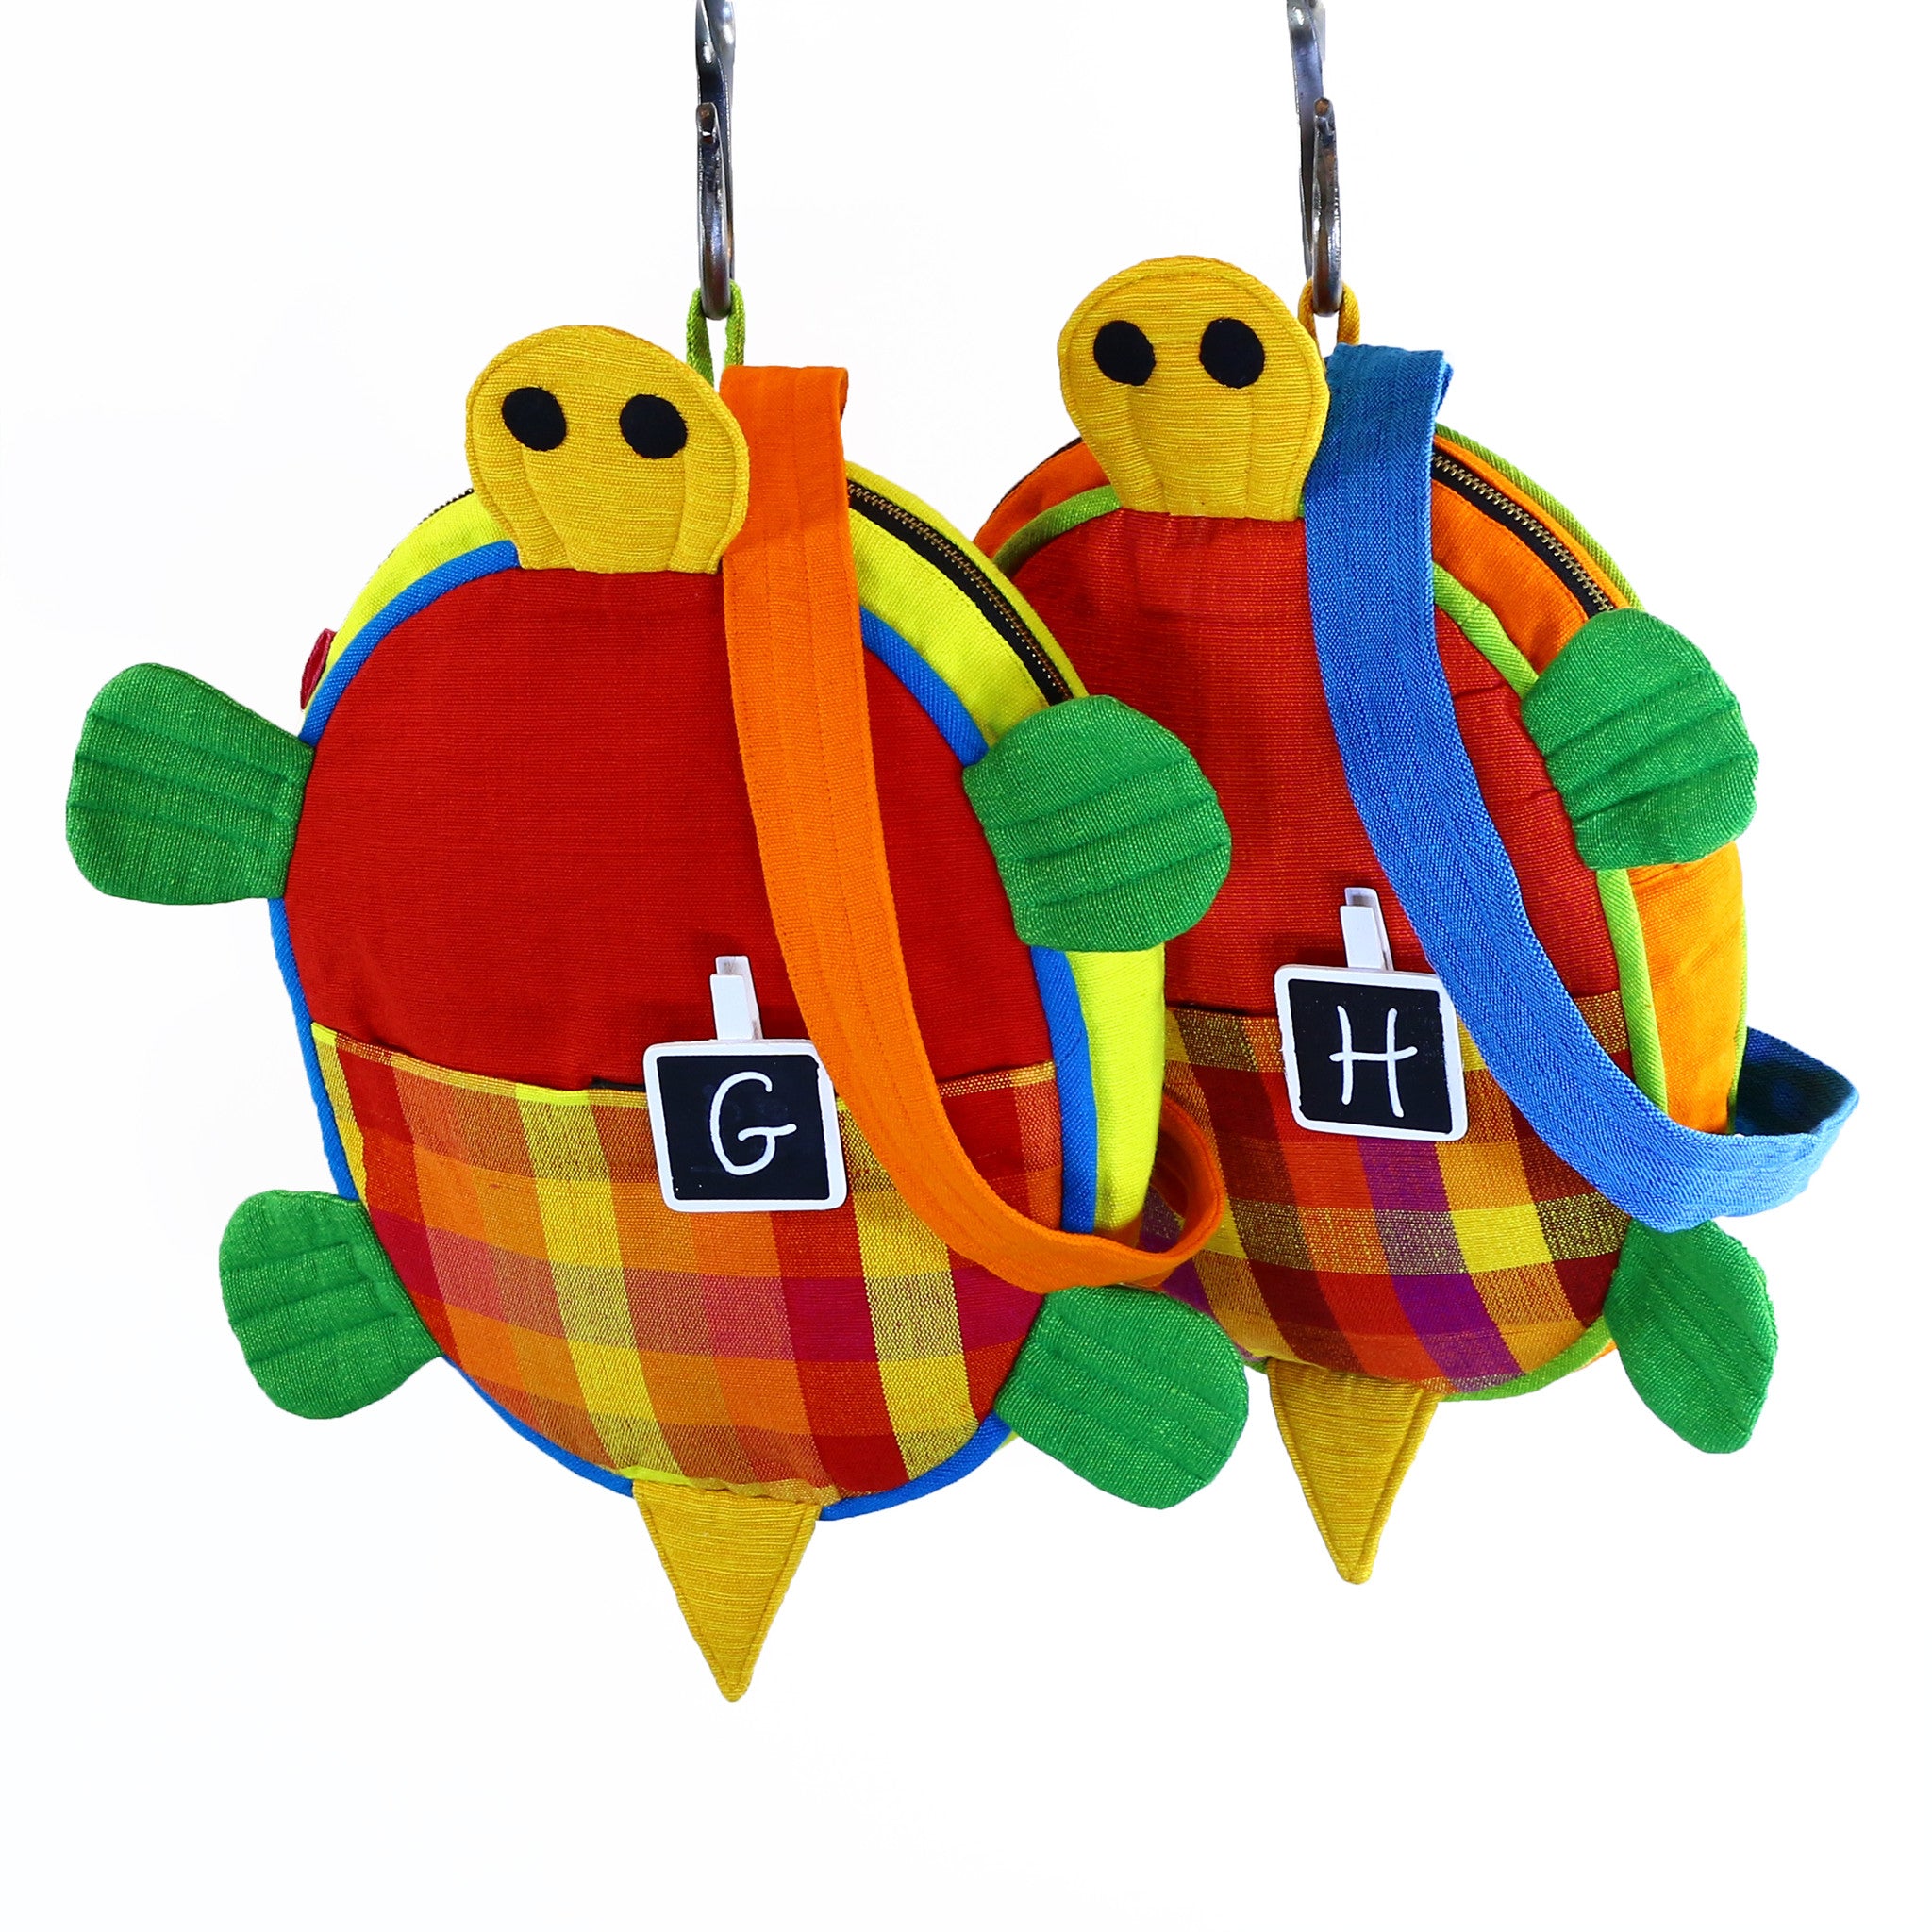 Turtle Backpack – Fireflies fabric patterns